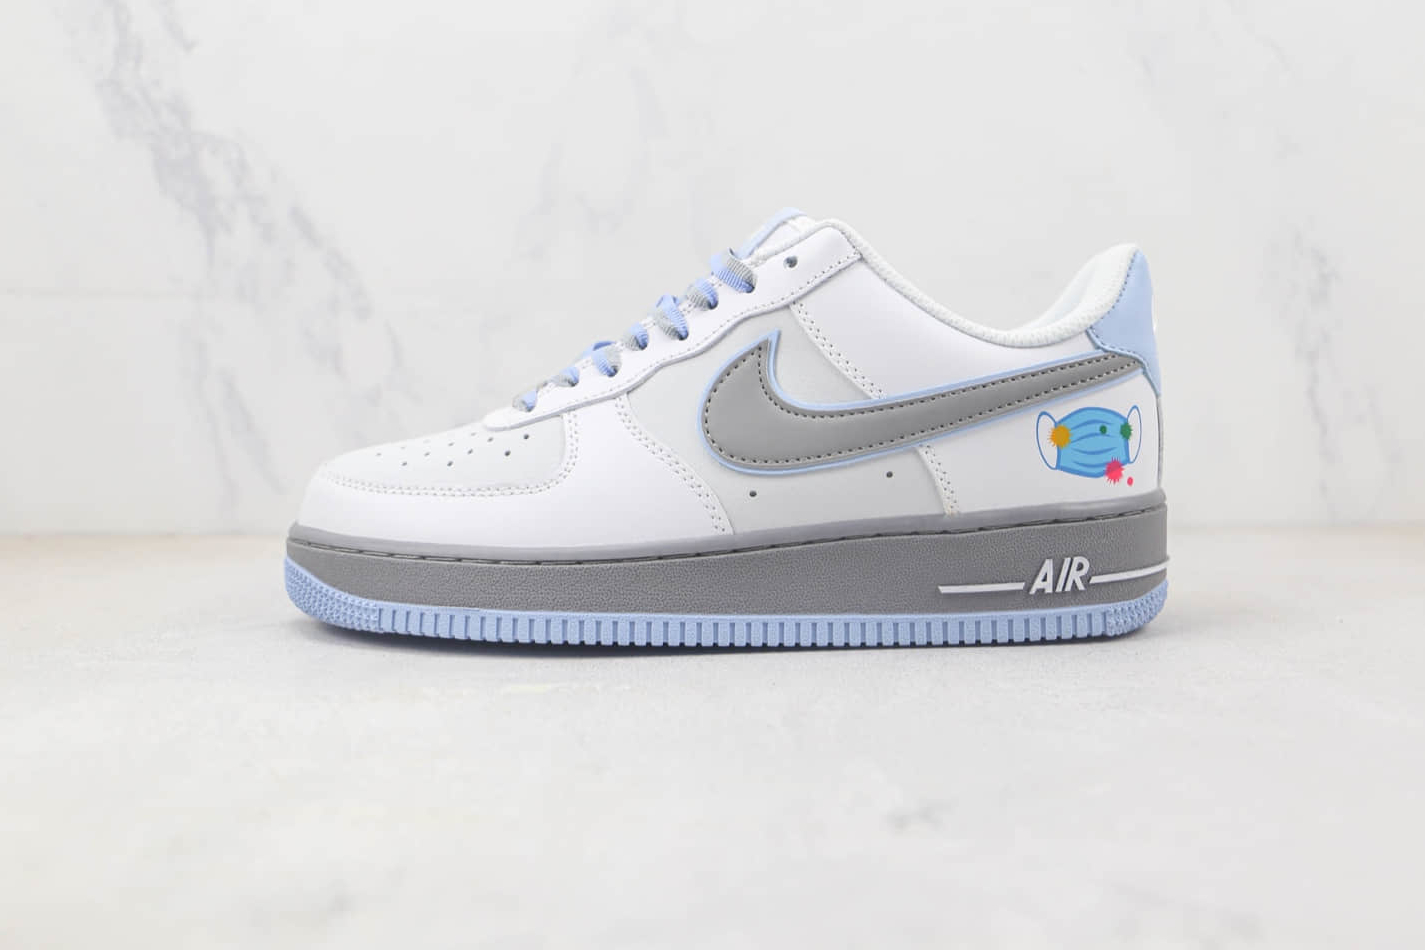 Nike Air Force 1 07 Low White Dark Grey Blue ZG0088-803 - Stylish and Comfortable Sneakers